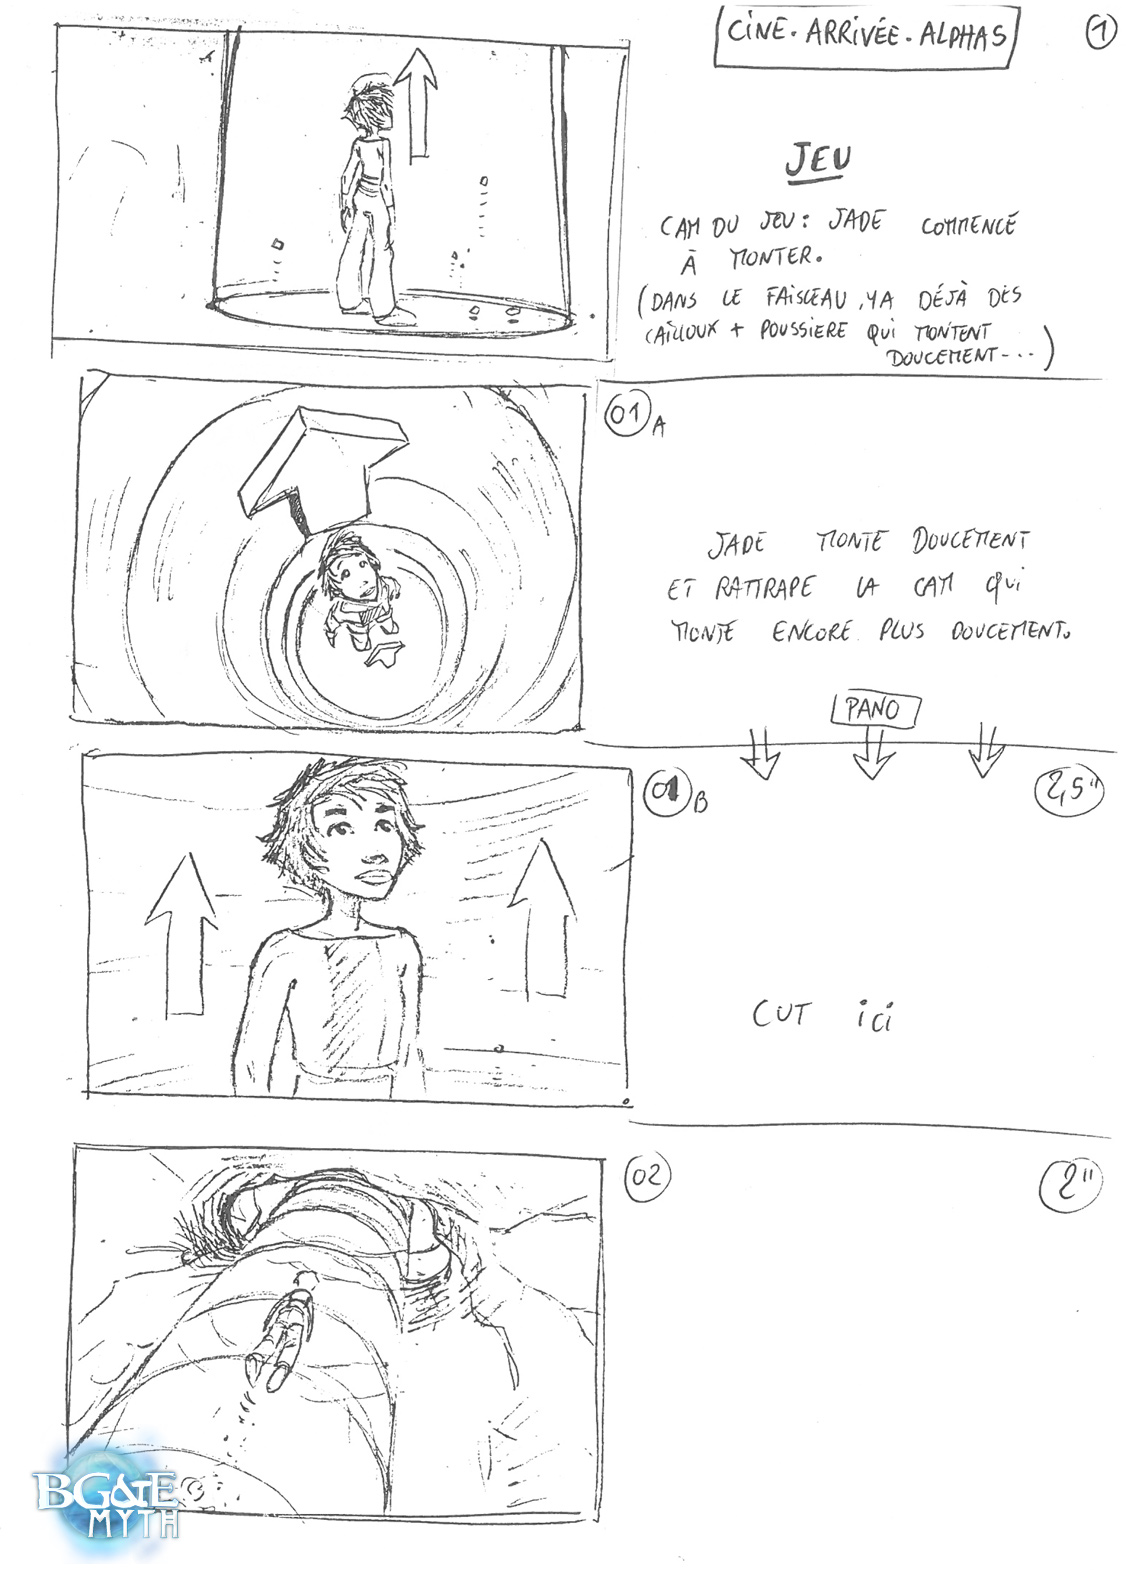 Storyboard : Les sections Alpha débarquent ! - Page 1